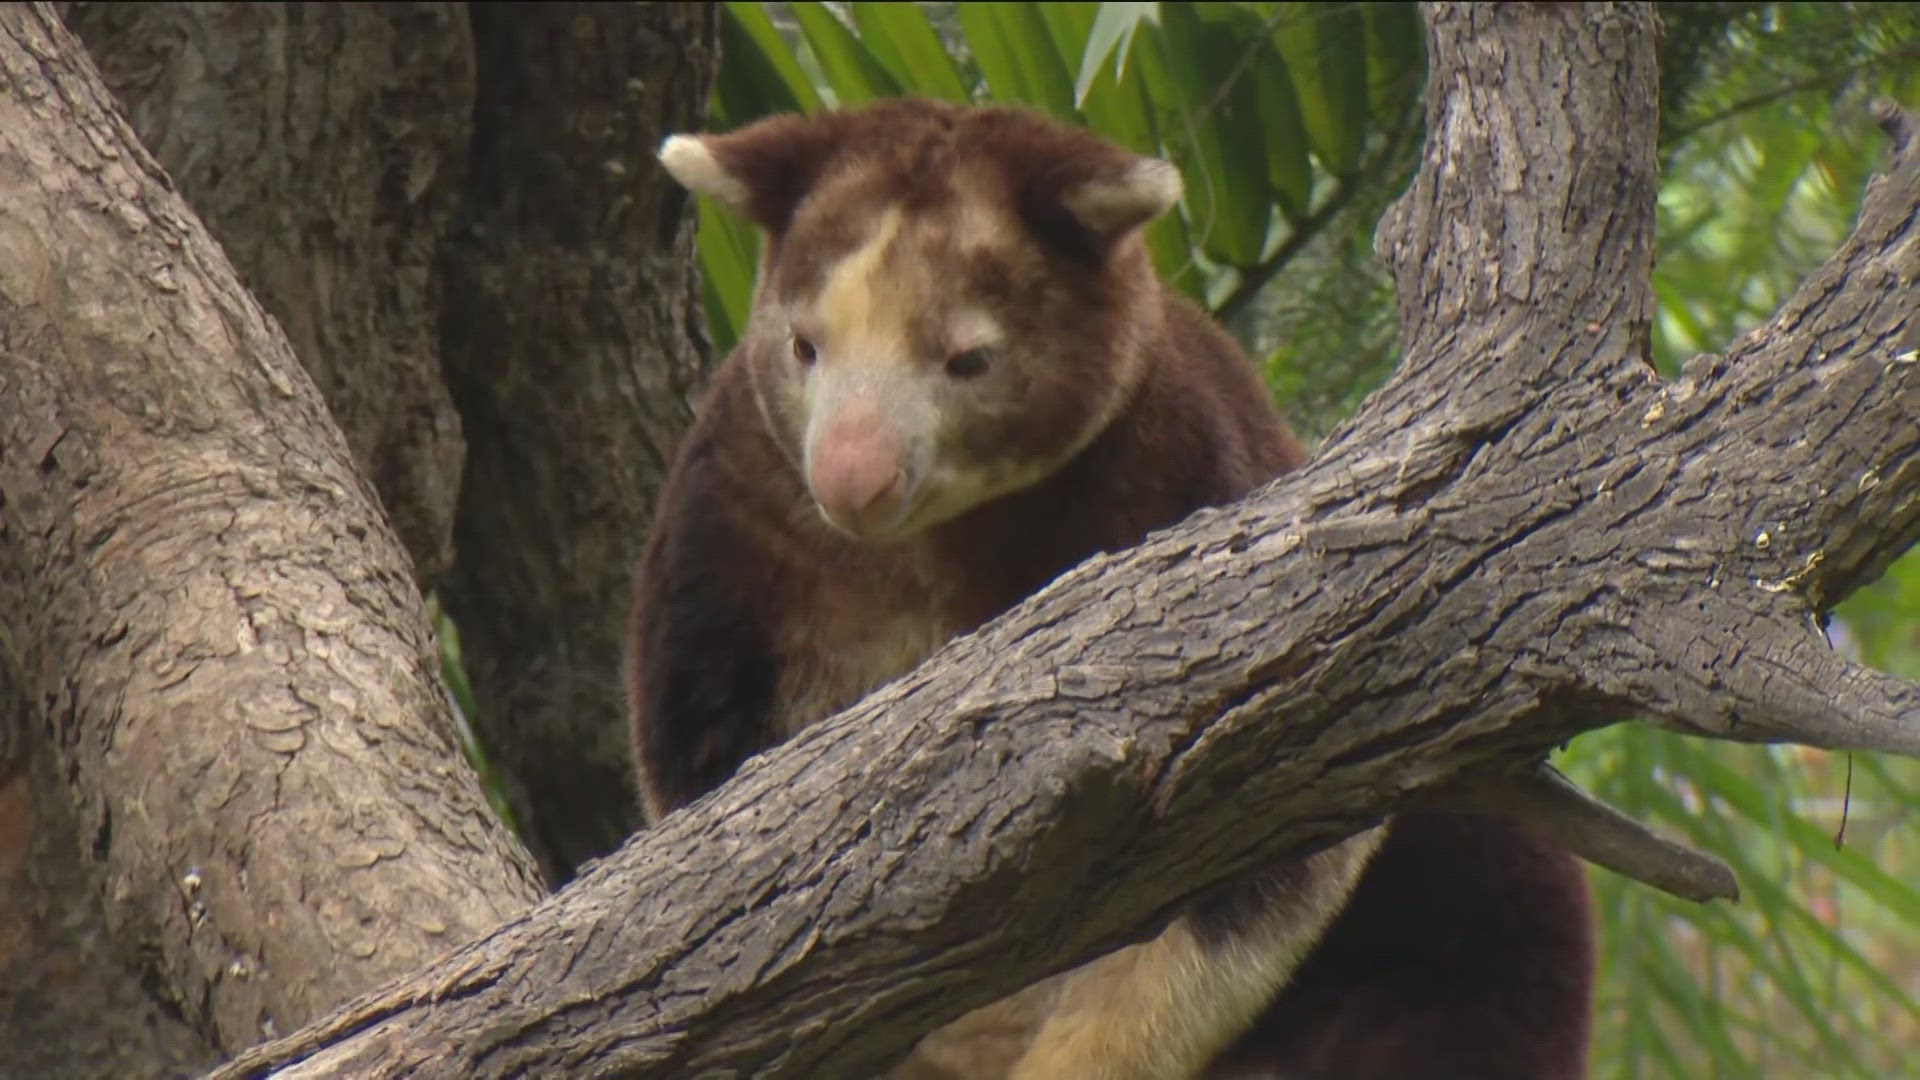 CBS 8 goes behind the scenes to learn about this endangered species from New Guinea.